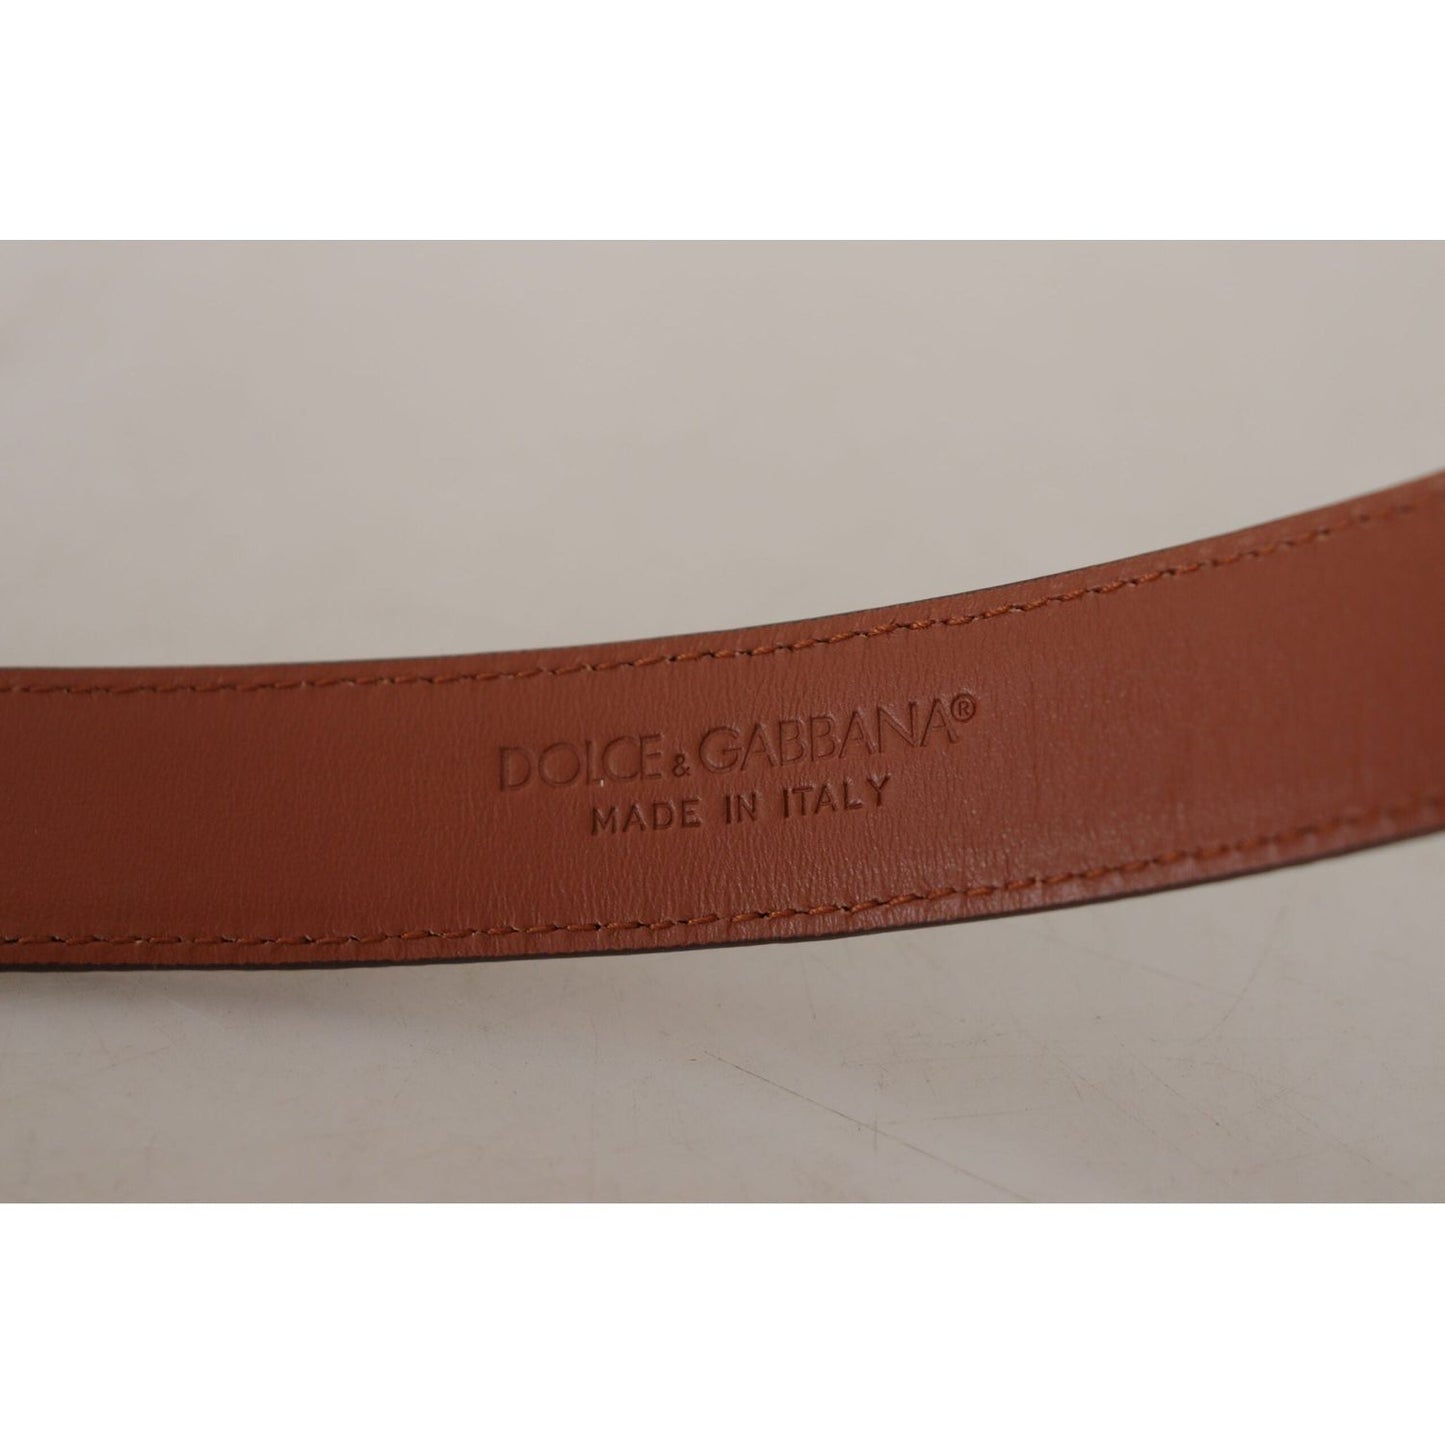 Dolce & Gabbana Elegant Engraved Leather Belt - Timeless Style brown-leopard-embossed-leather-buckle-belt IMG_8809-scaled-37acbc71-832.jpg